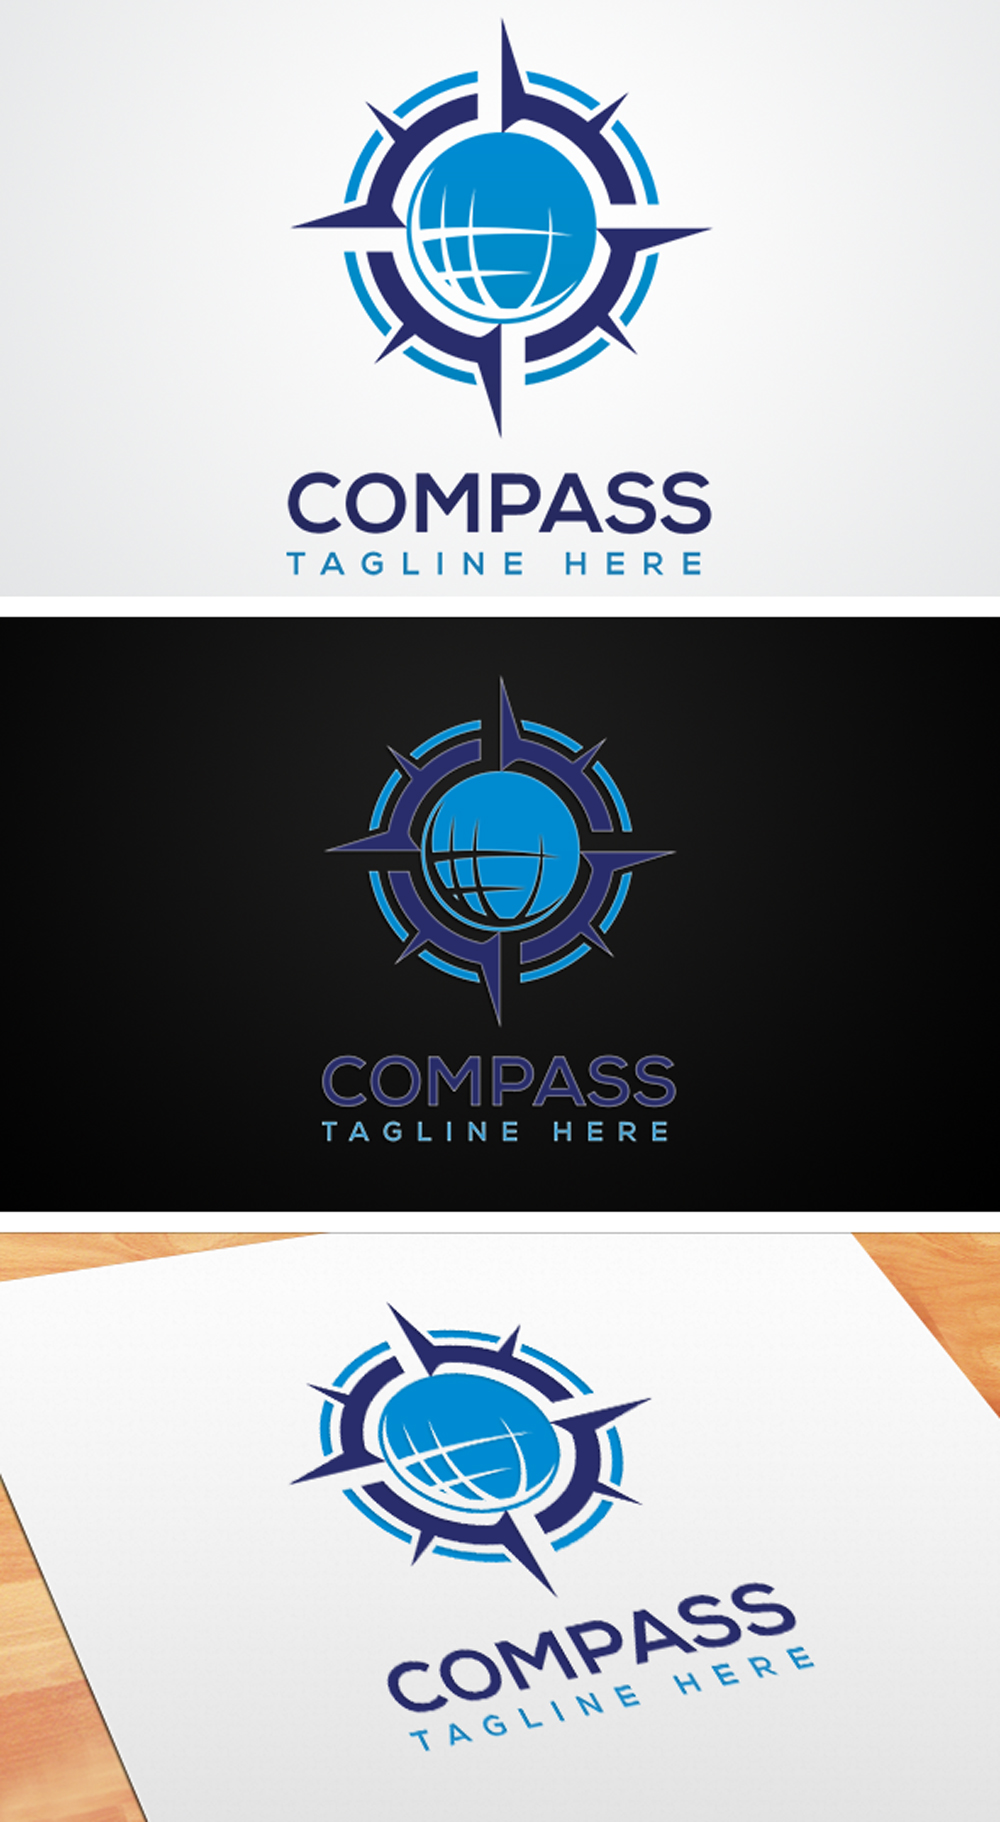 Collection of images of marvelous compass logos.